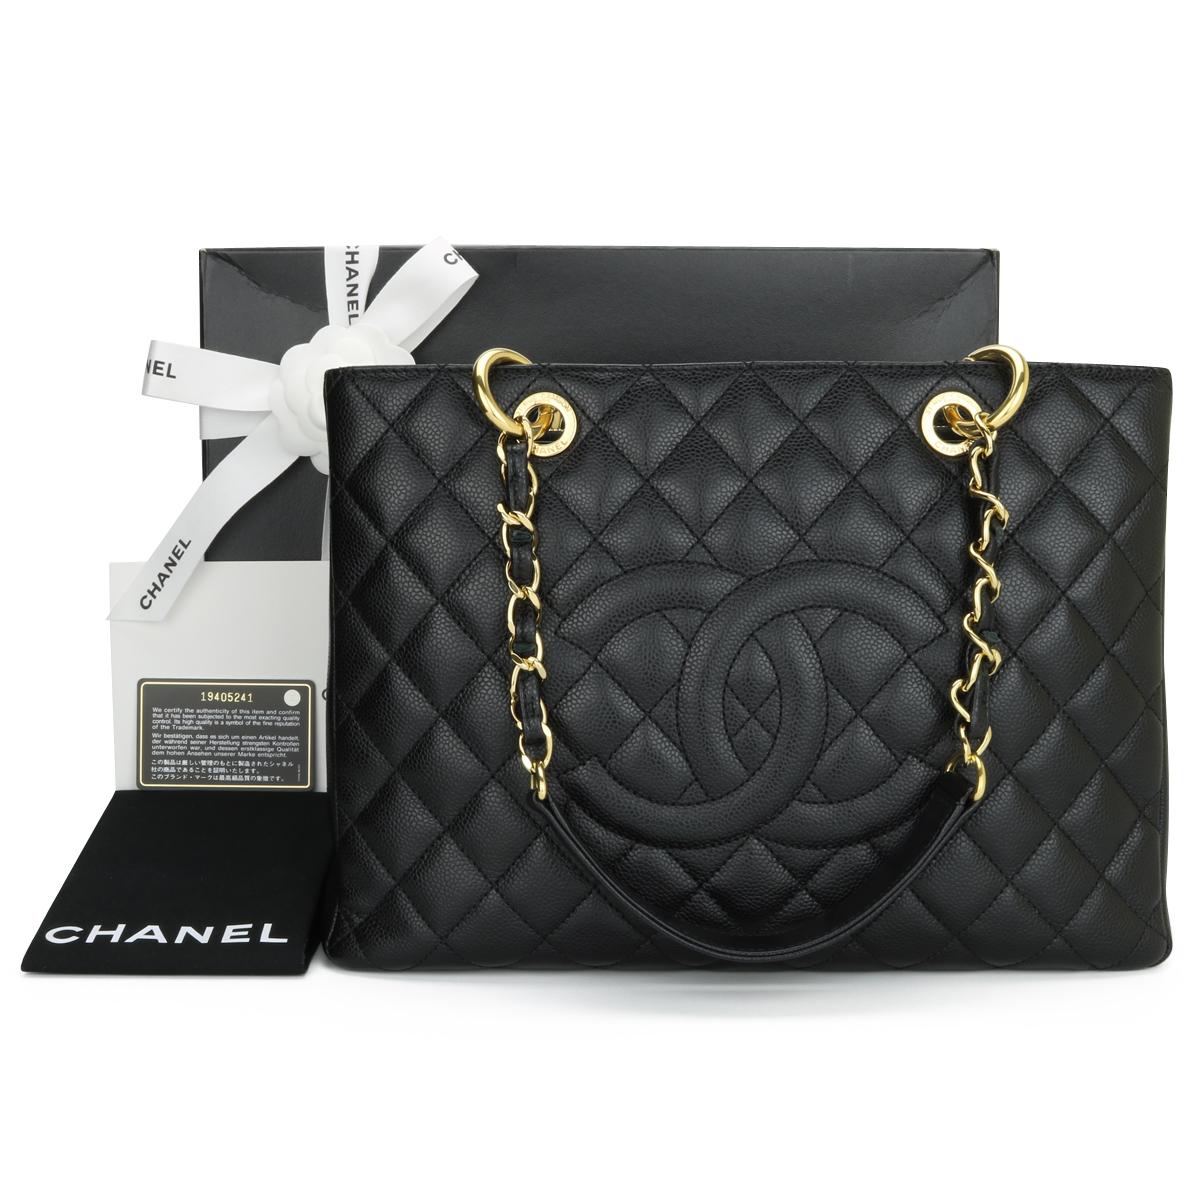 CHANEL Grand Shopping Tote (GST) Black Caviar with Gold Hardware 2015.

This bag is in excellent condition, the bag still holds its shape well, and the hardware is still very shiny.
As Chanel has discontinued the Grand Shopping Tote (GST), it is now